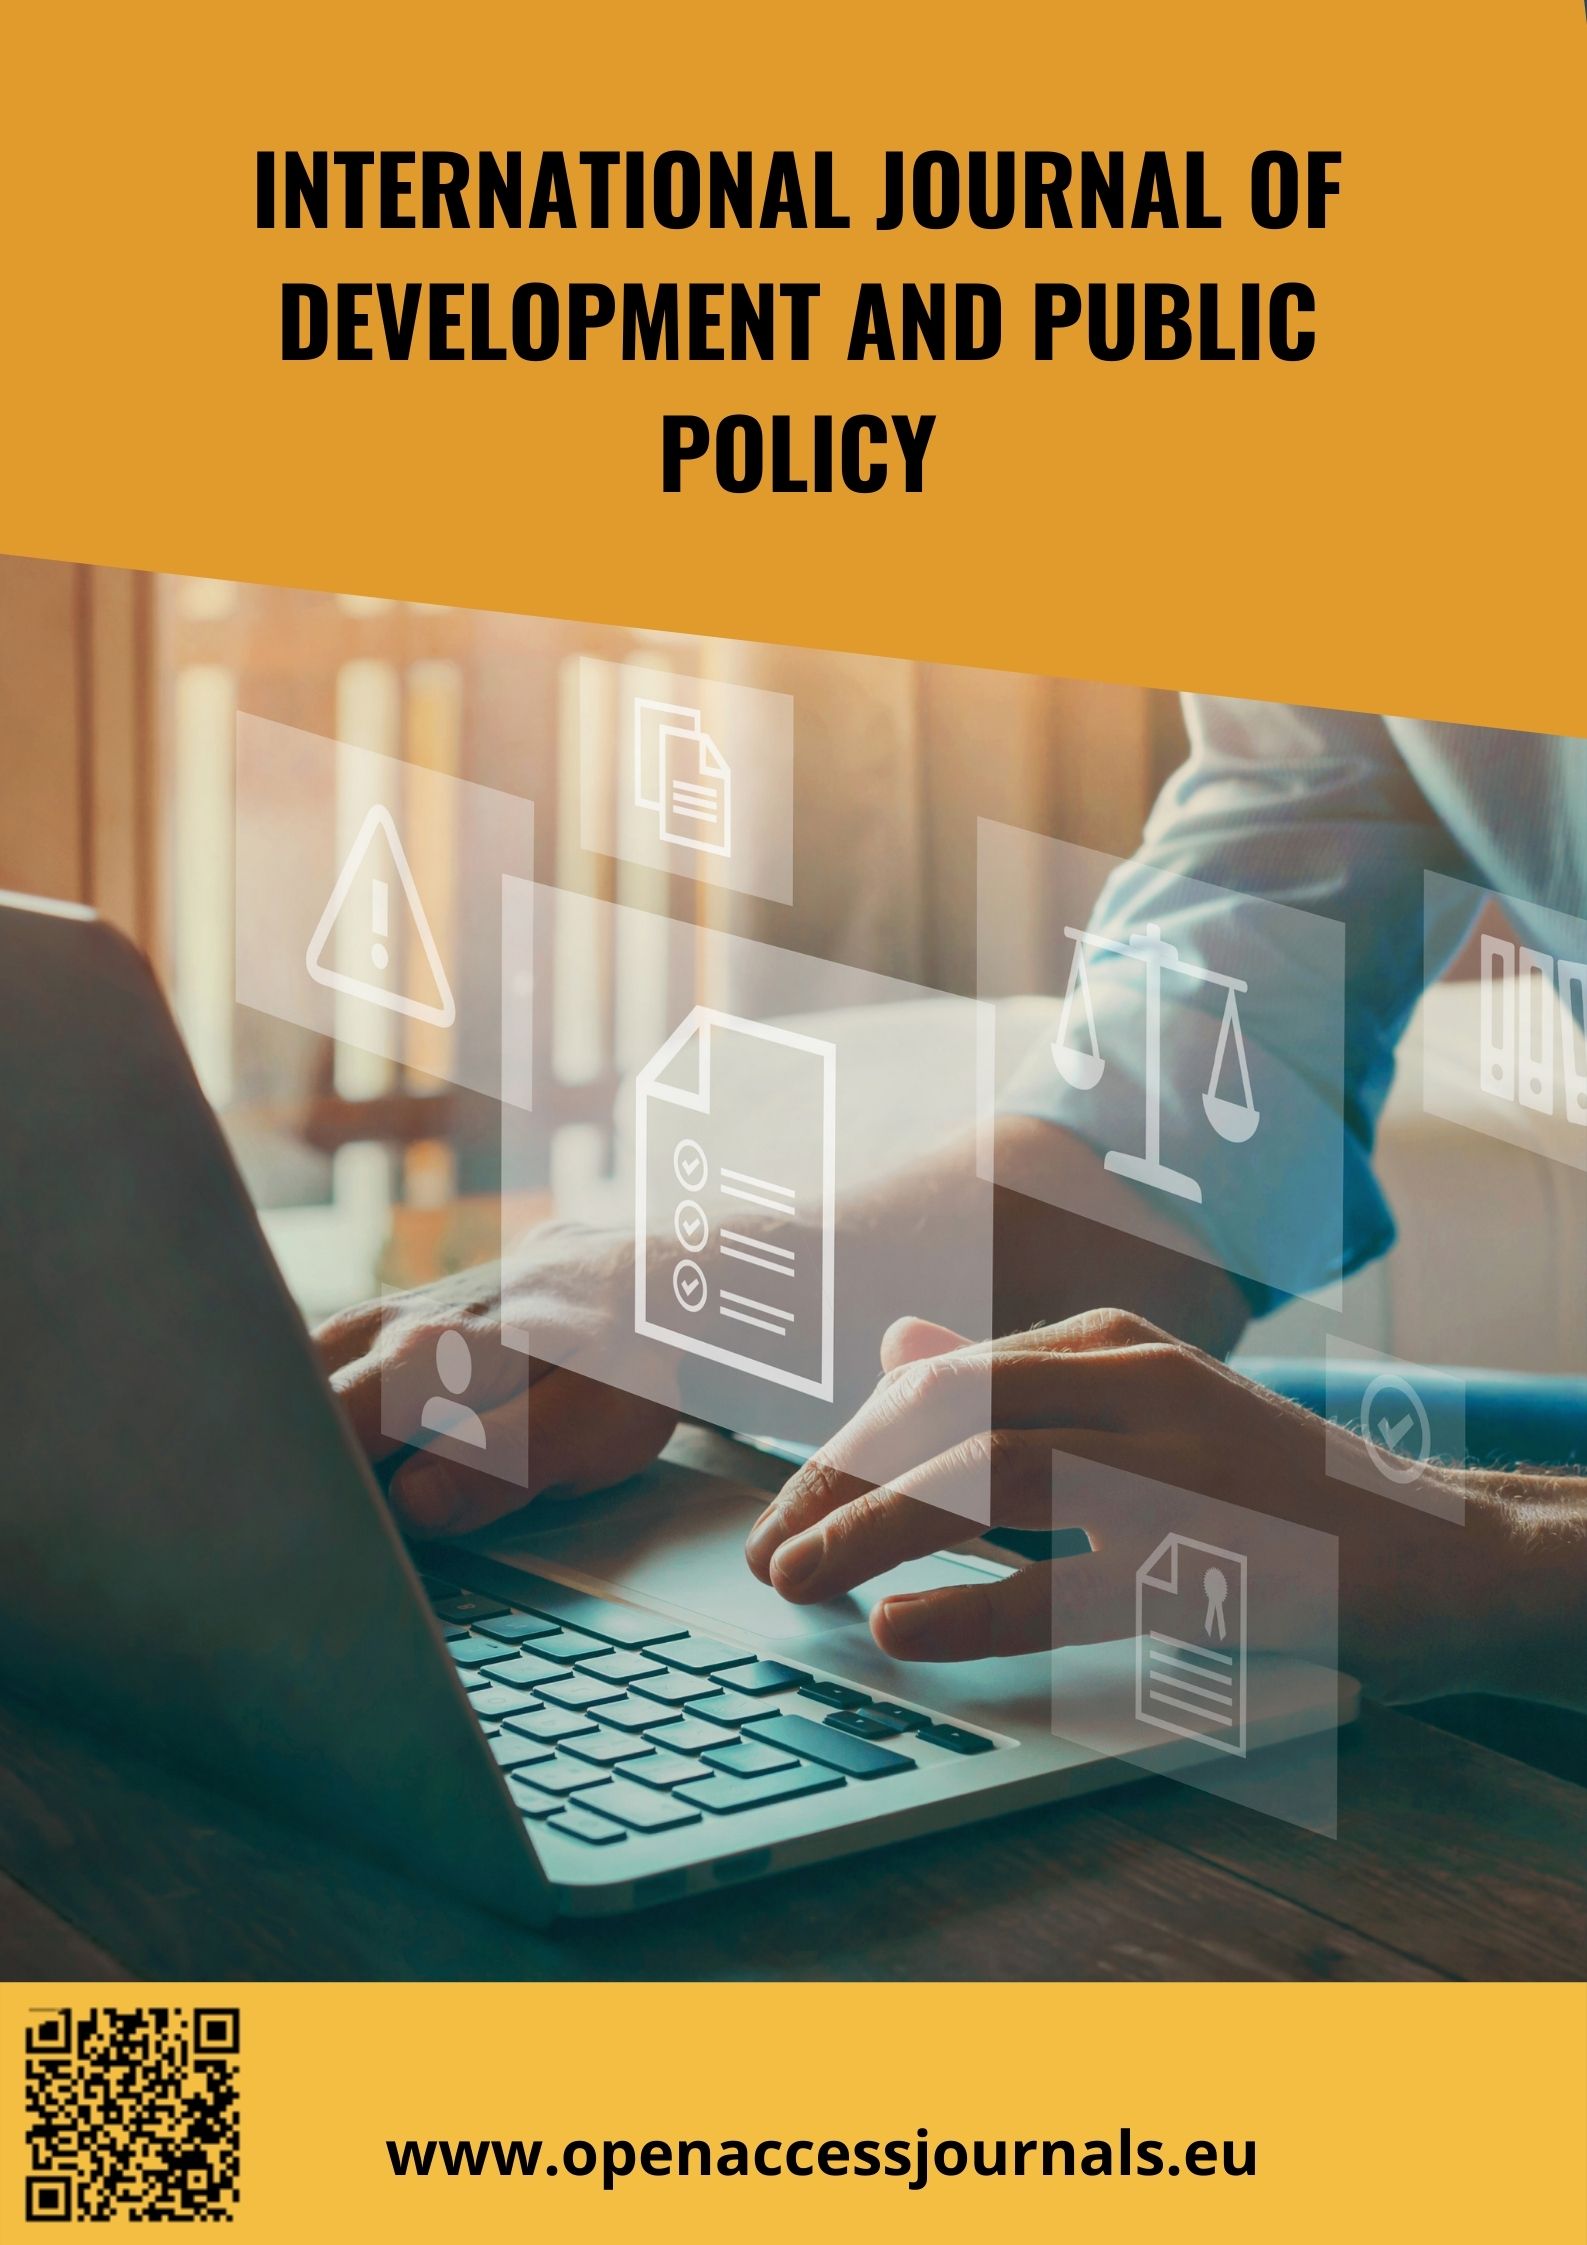 International Journal of Development and Public Policy